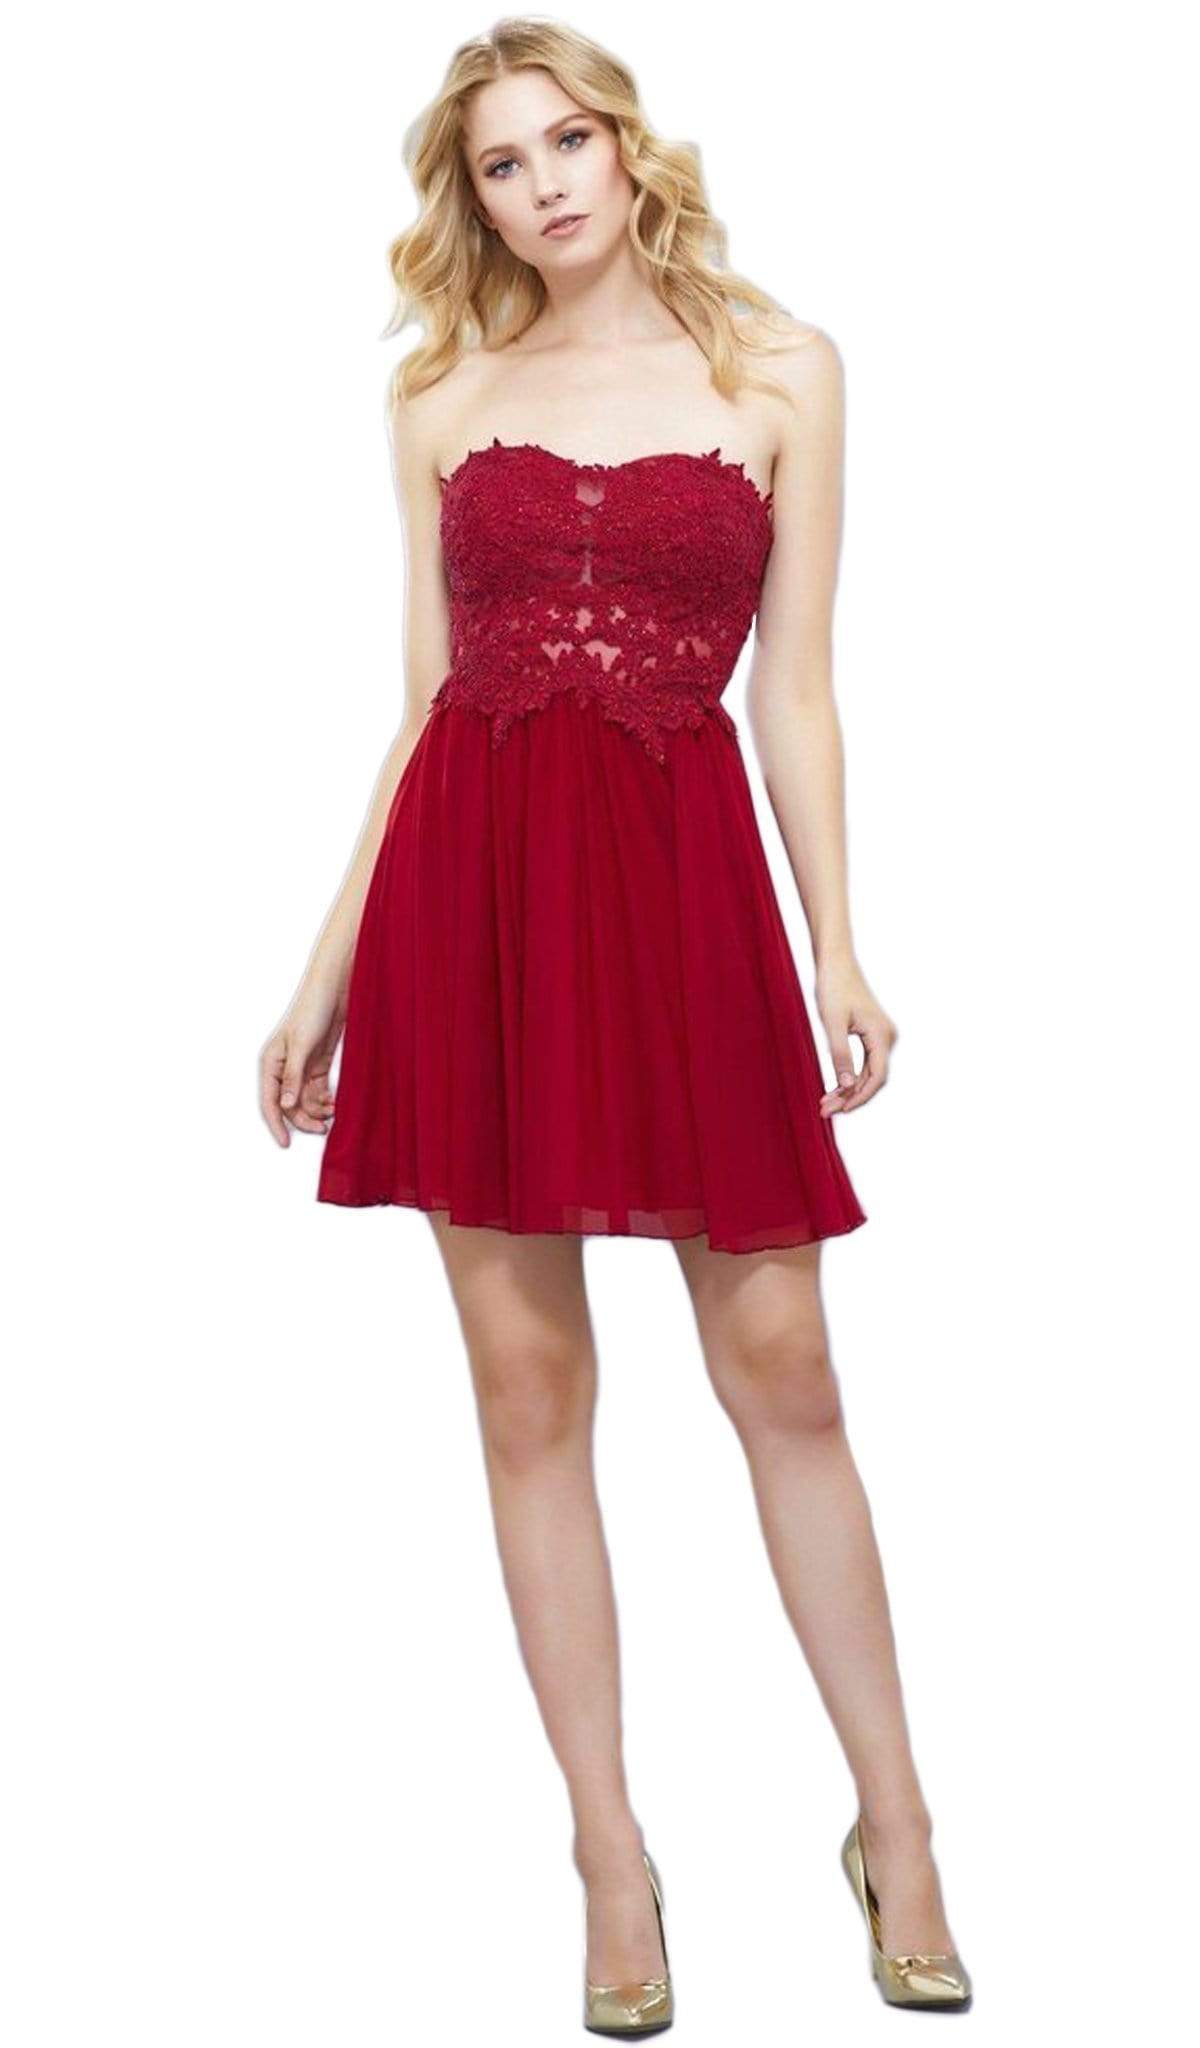 Nox Anabel - 6314 Strapless Embellished Sweetheart Cocktail Dress Cocktail Dresses XS / Burgundy